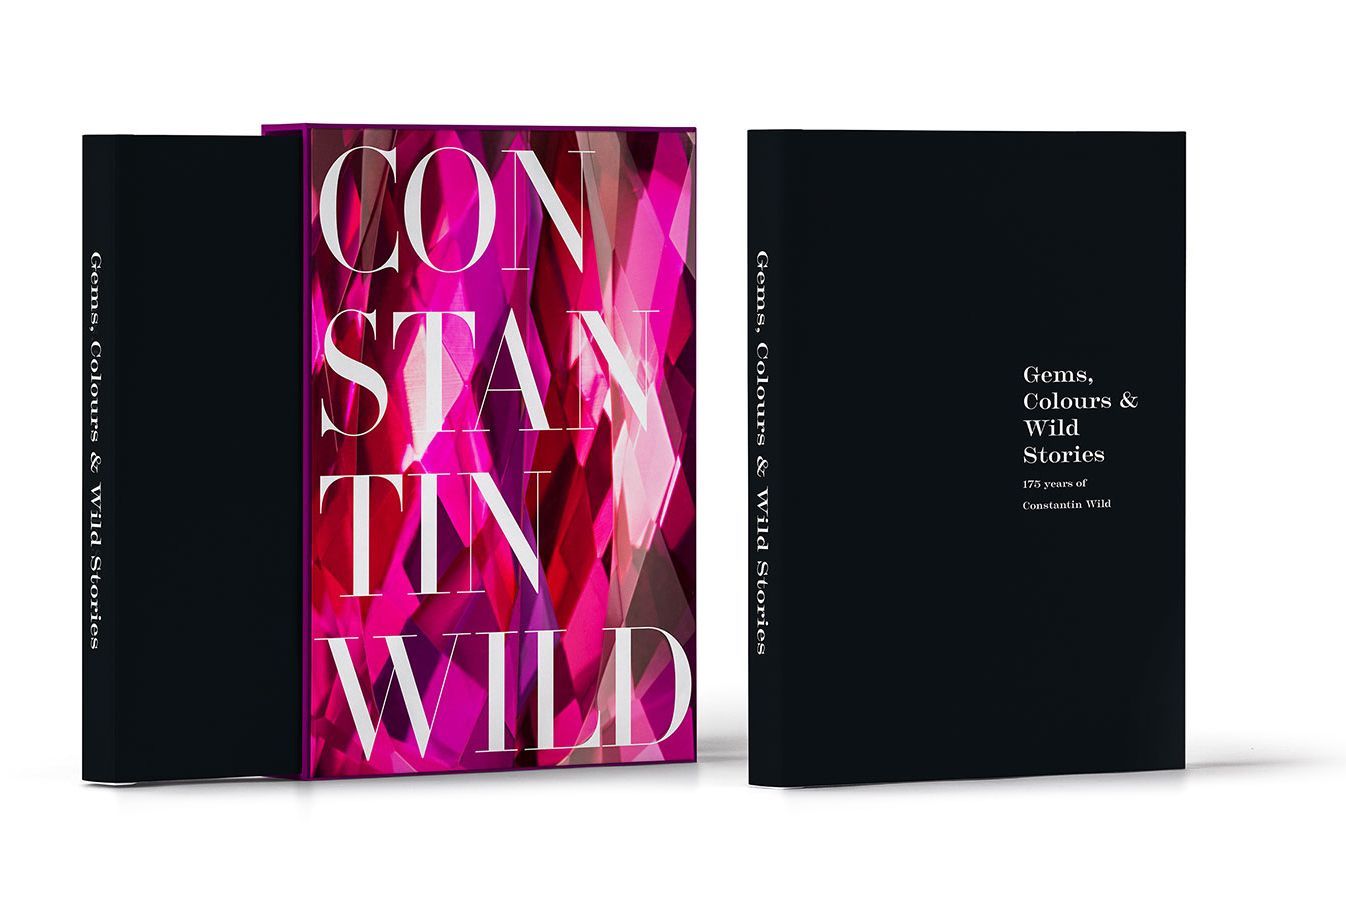 Gems, Colours and Wild Stories by Constantin Wild